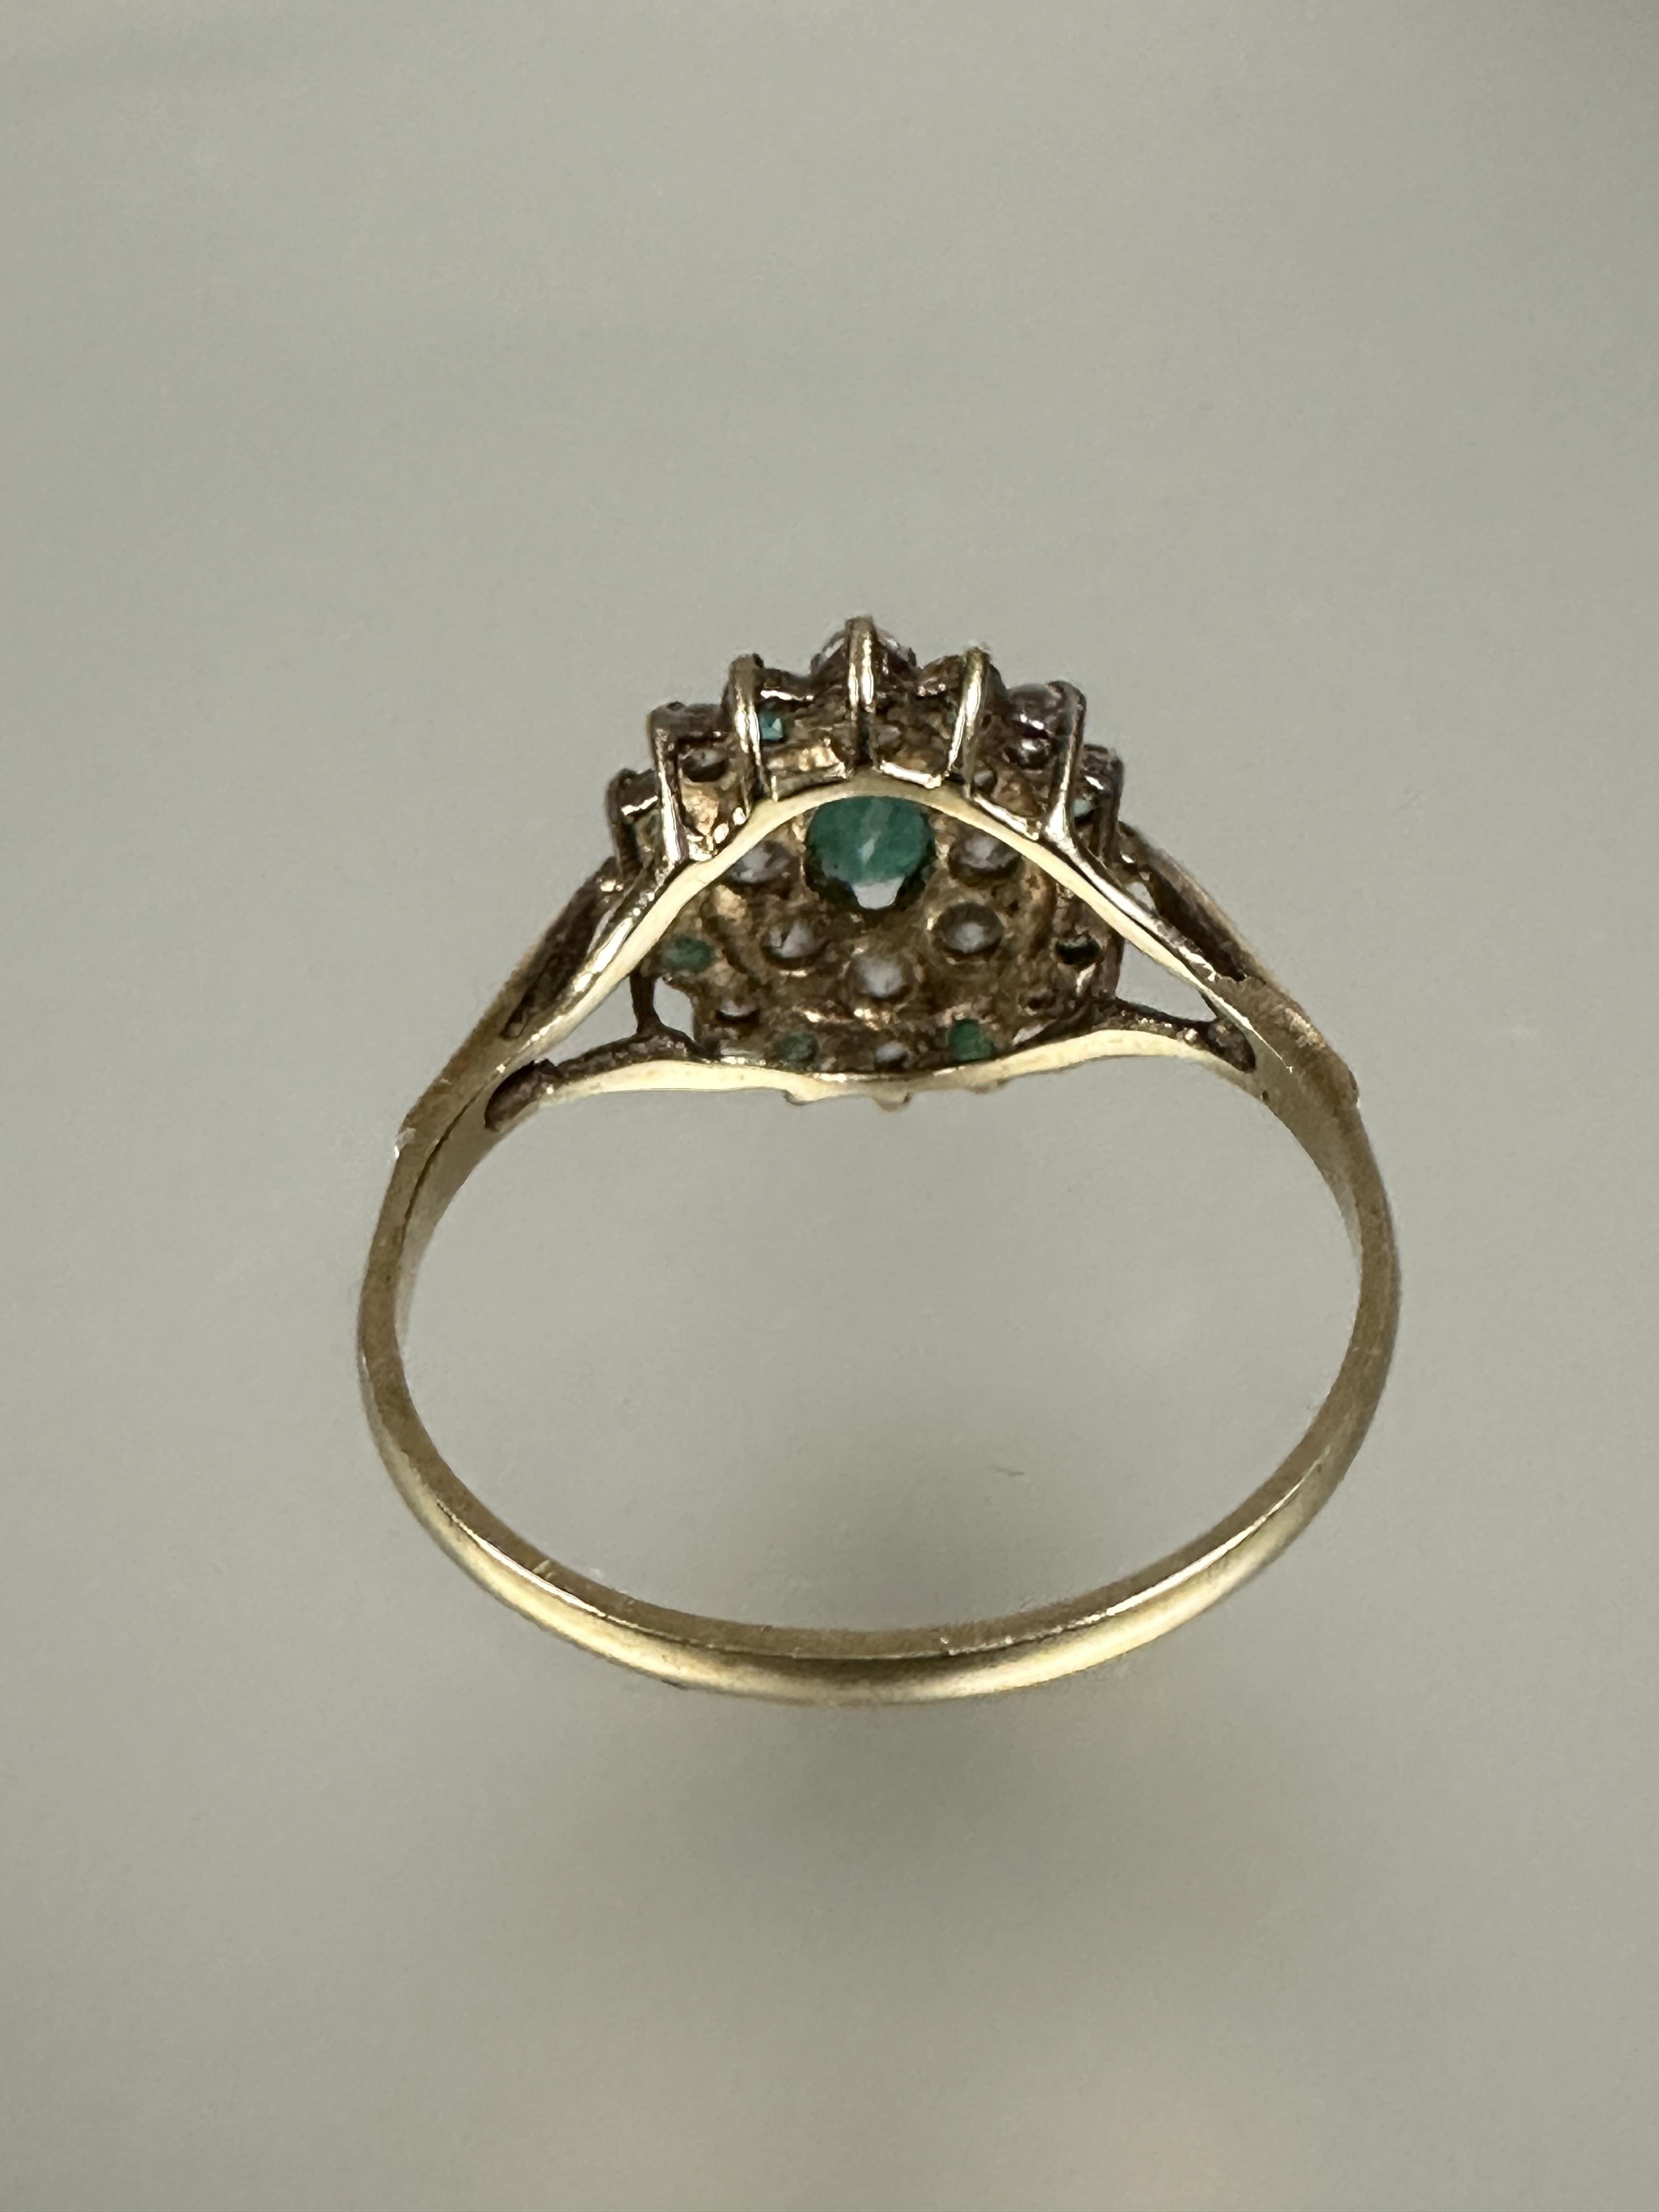 A 9ct gold emerald and cz cluster ring with oval central emerald and outer border of eight - Image 3 of 3